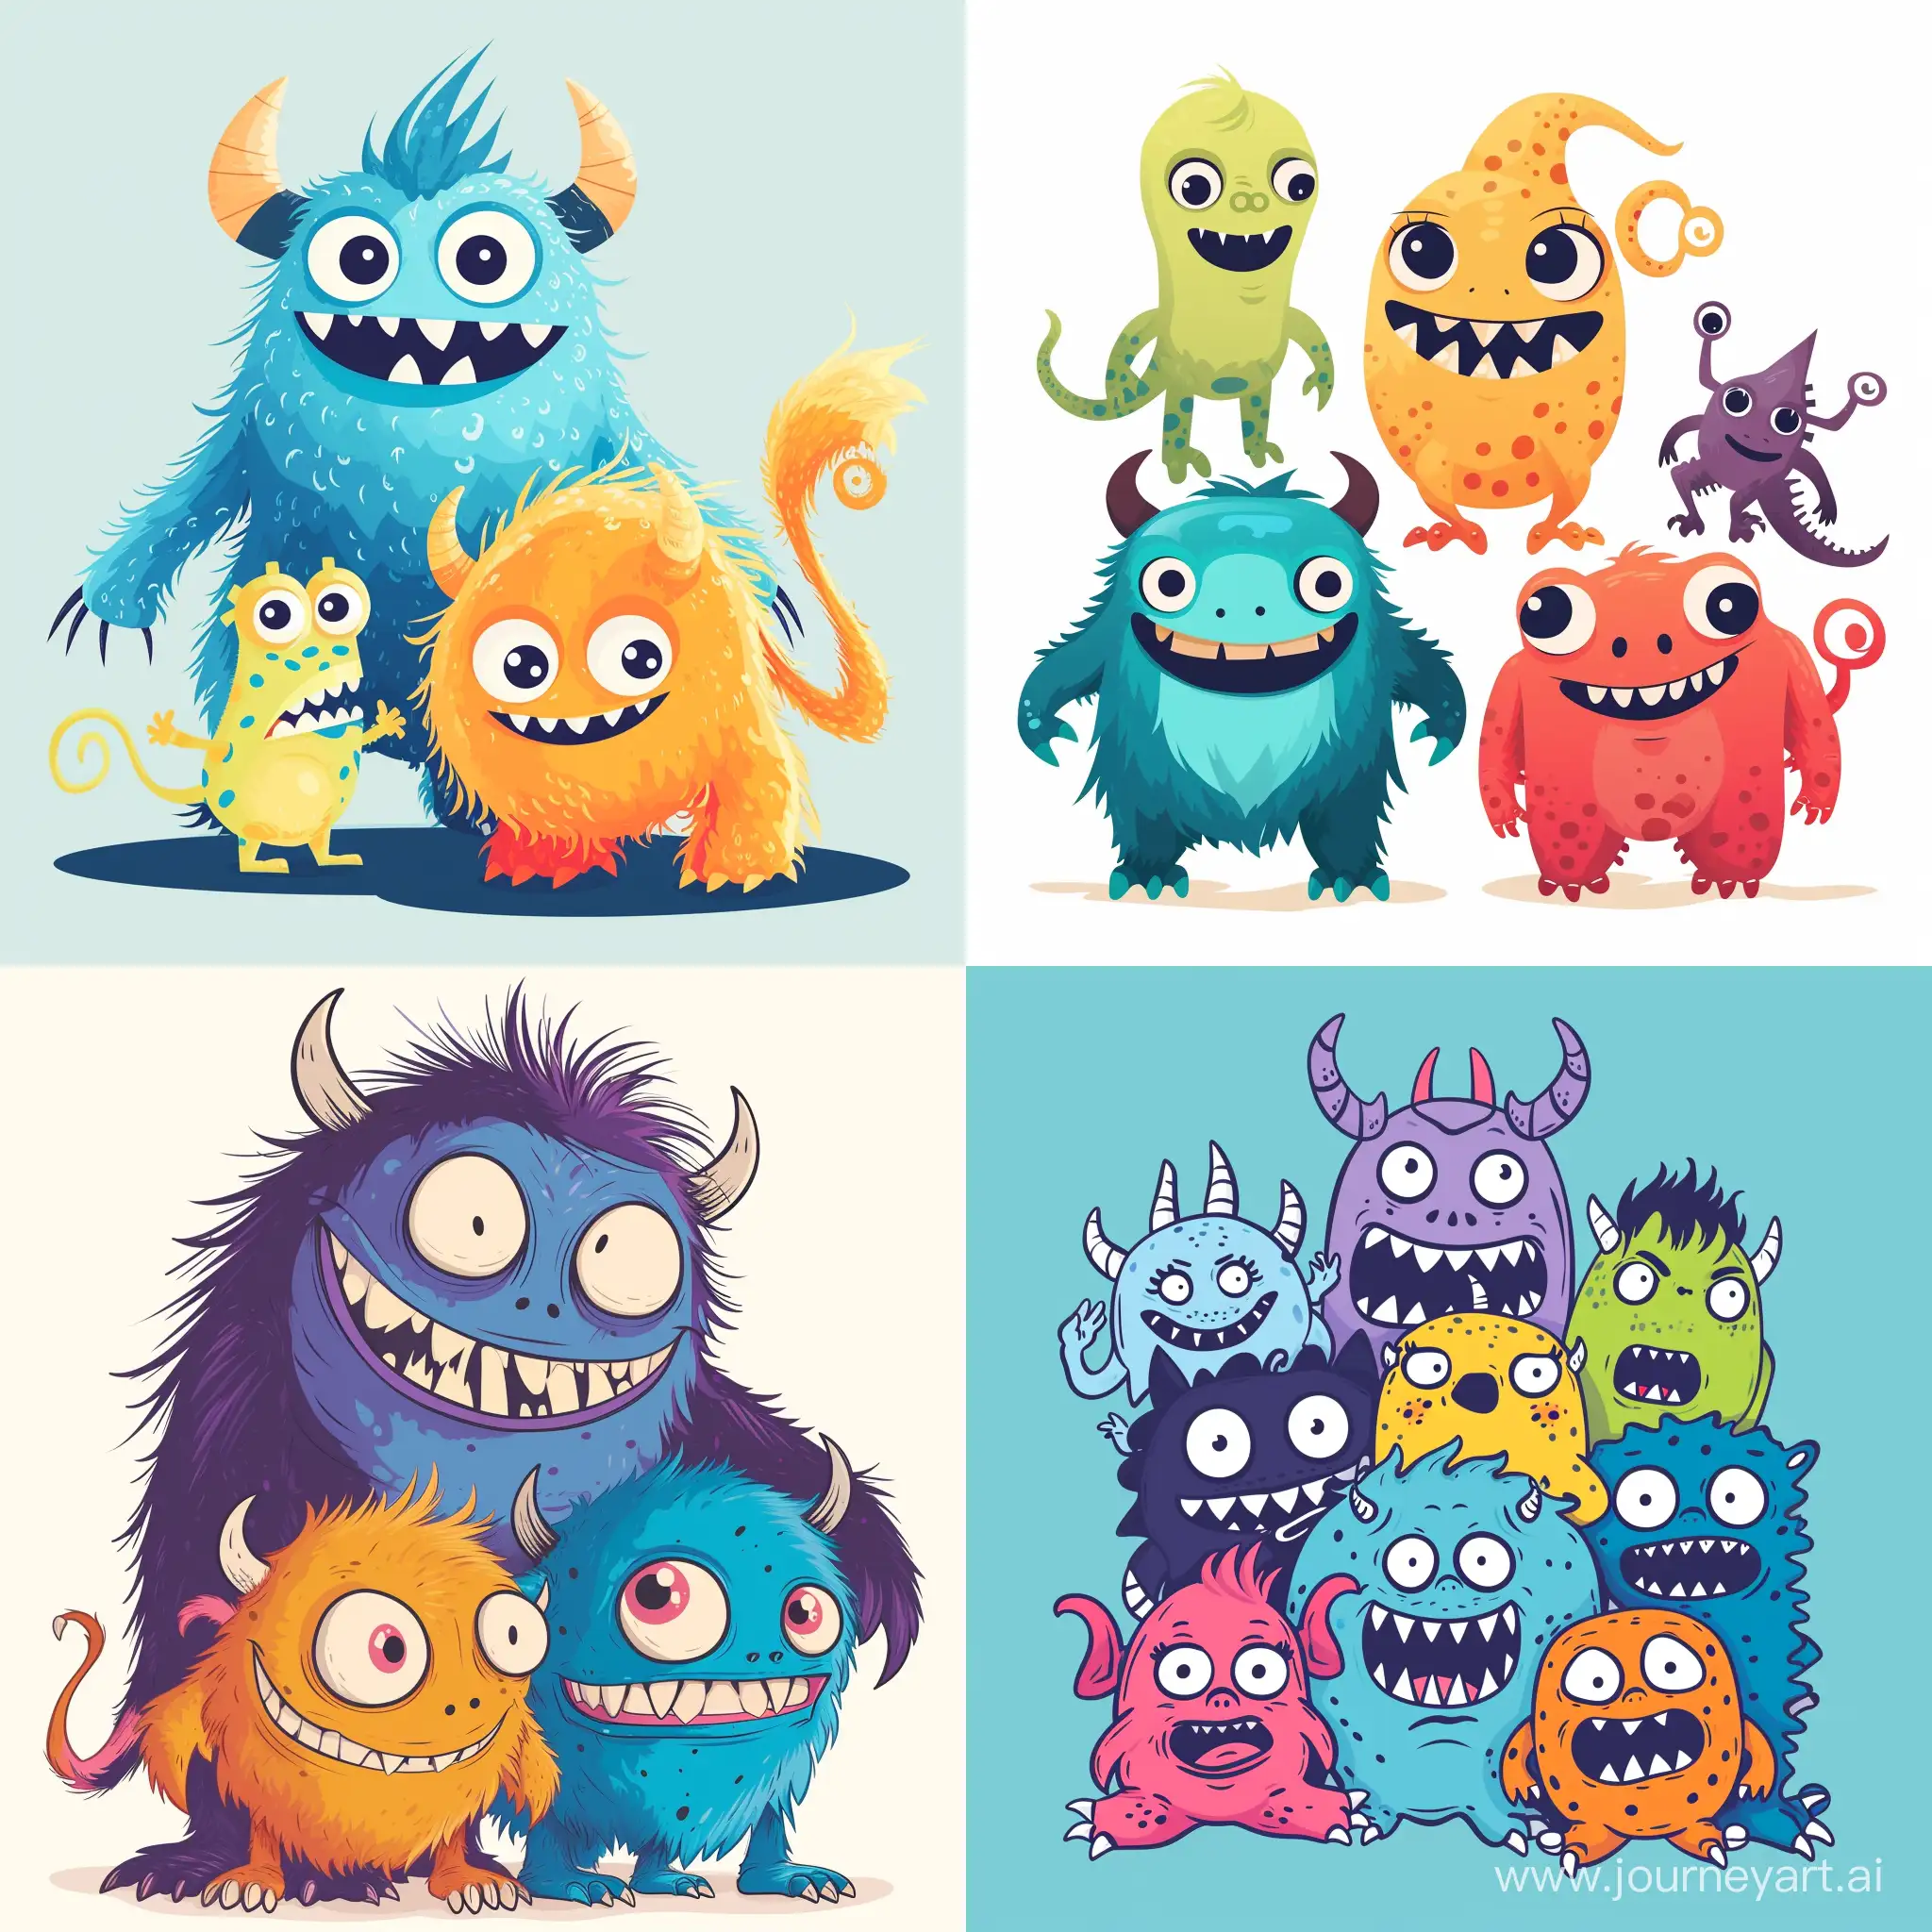 Playful-Cartoon-Cute-Monsters-in-Vibrant-Vector-Style